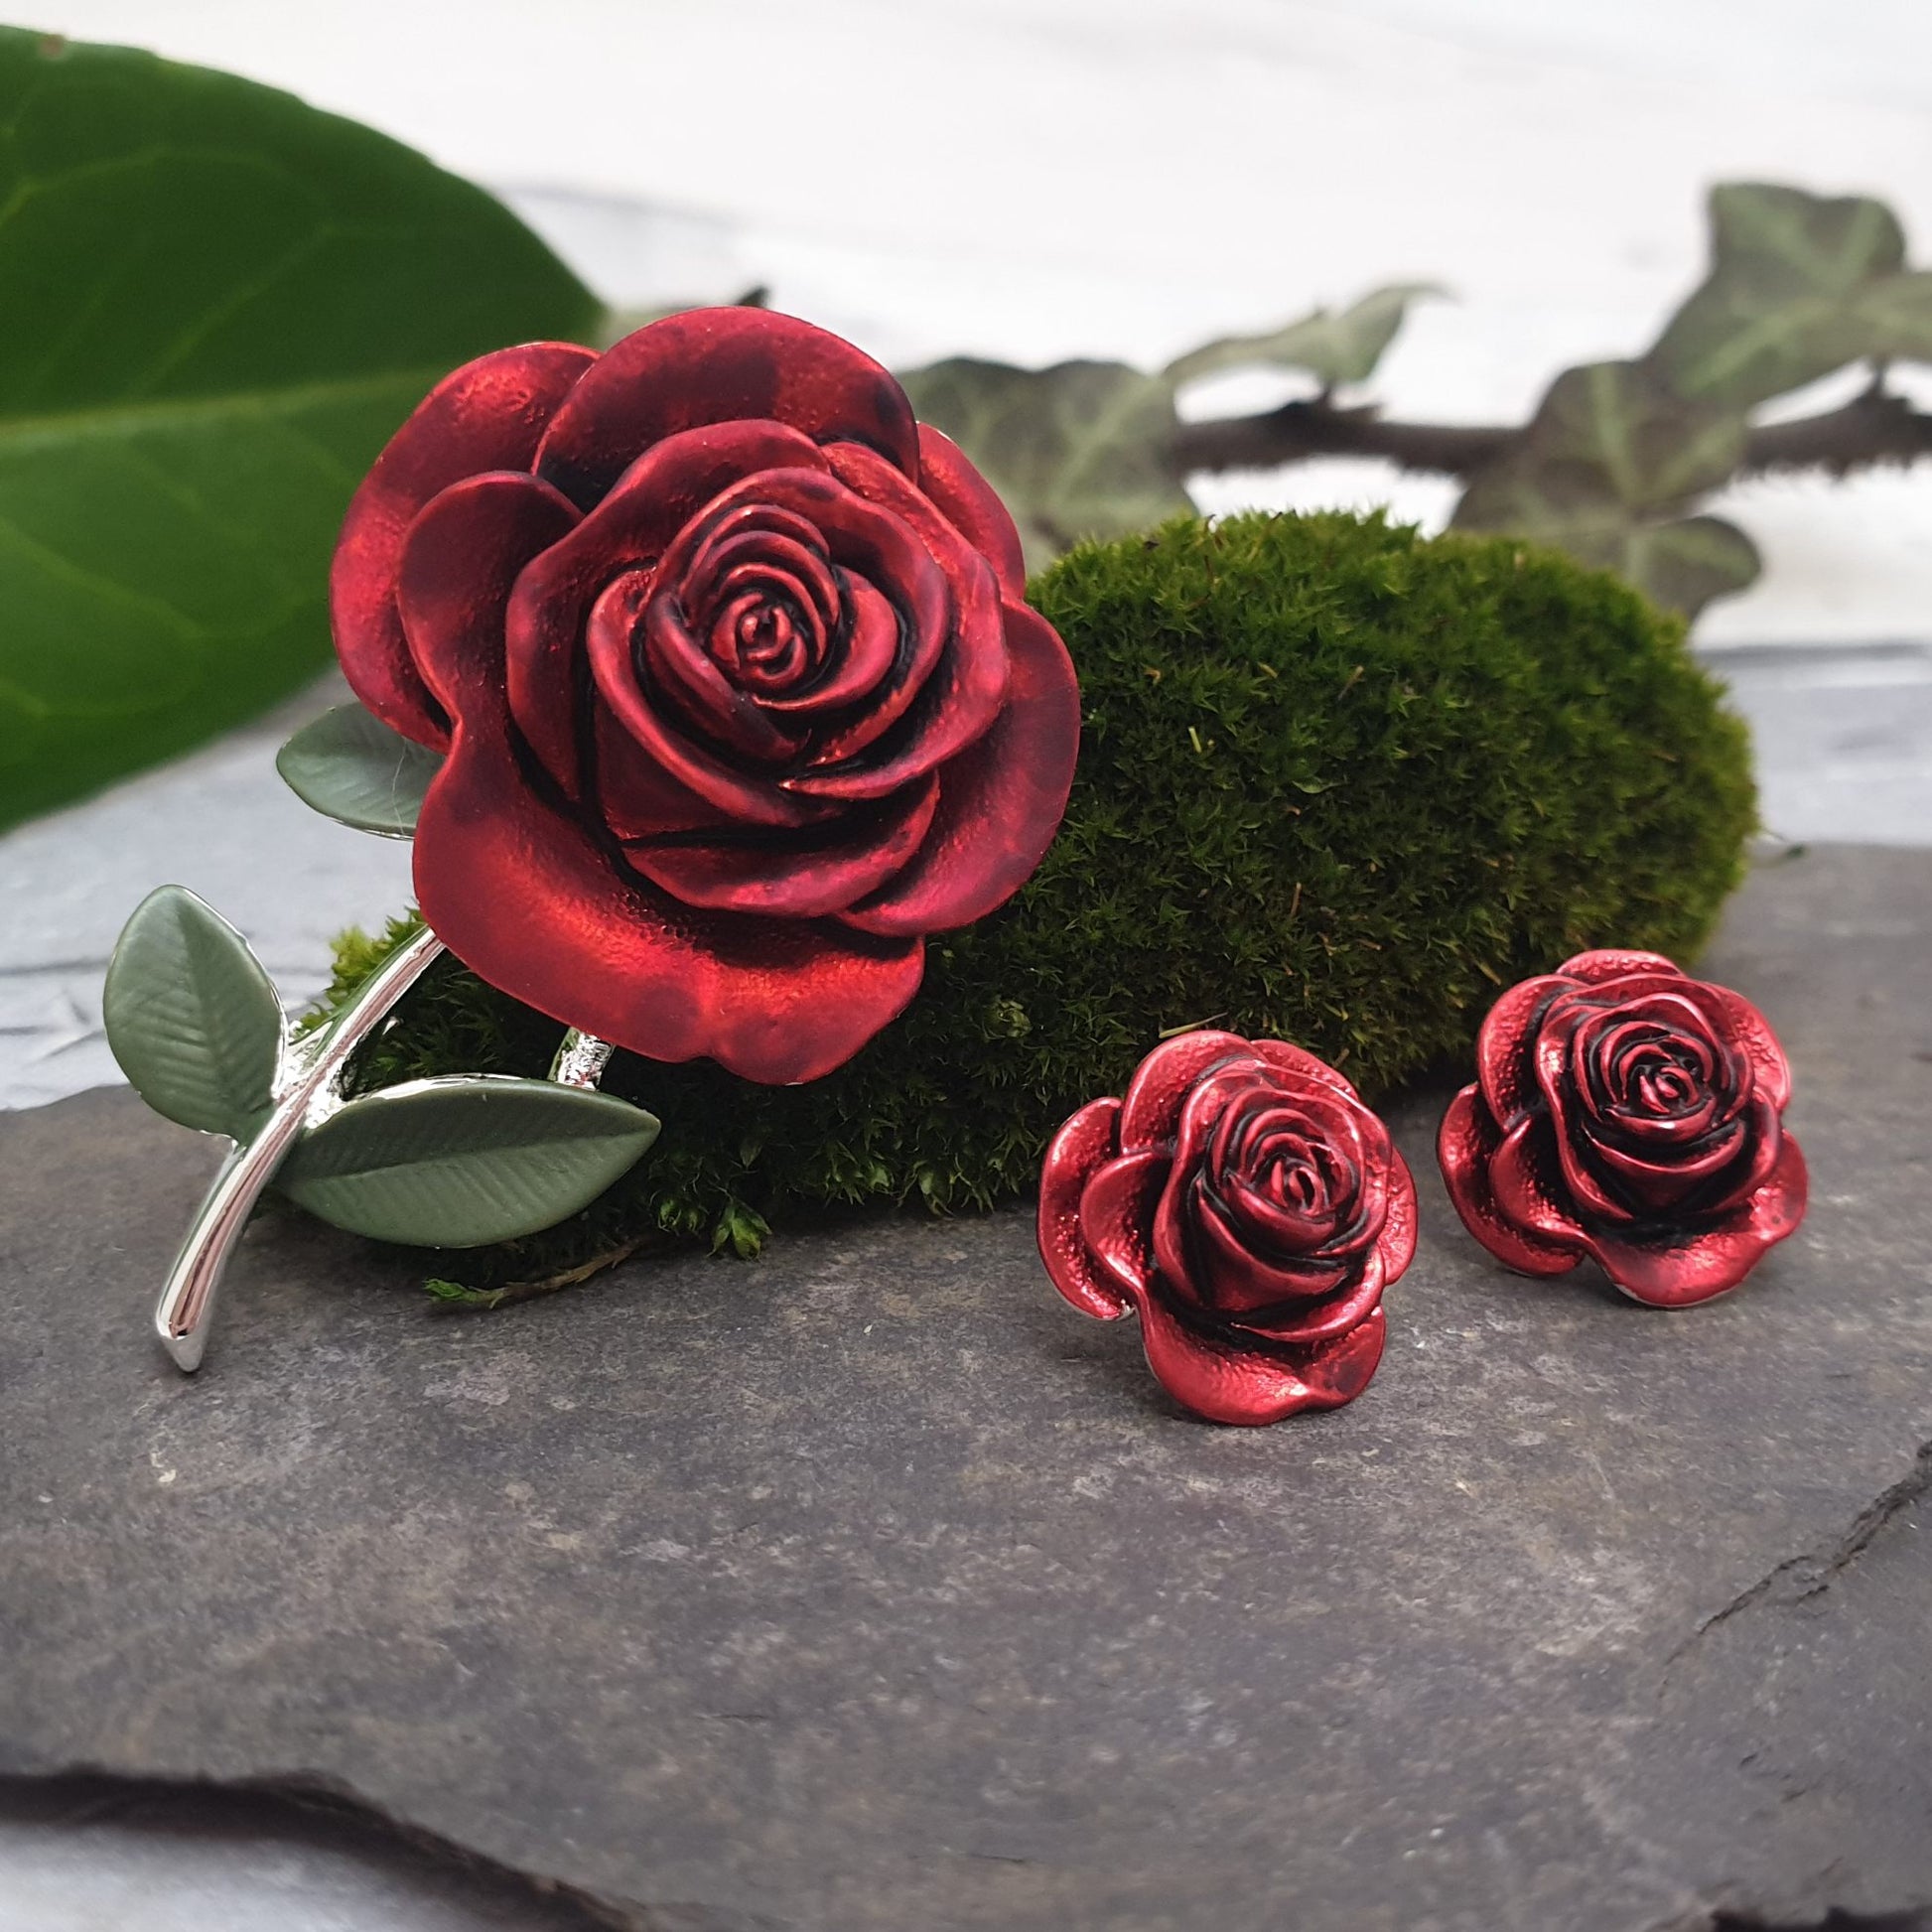 Matching Red Rose stud earrings and Brooch set